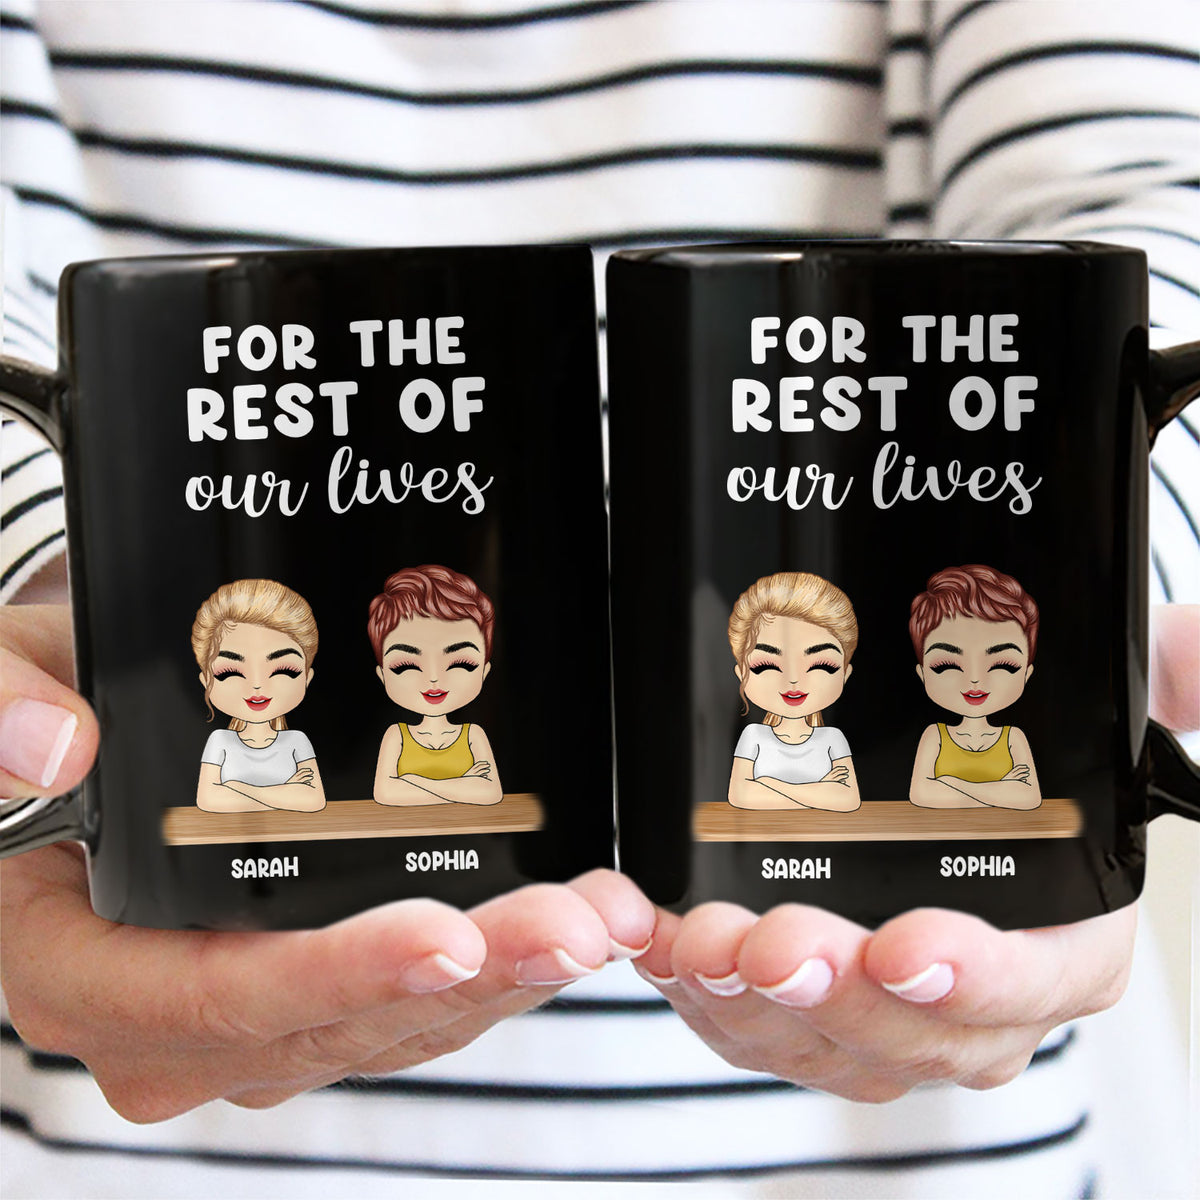 Let's Make Coffee Together / For the Rest of our Lives Couple Mug